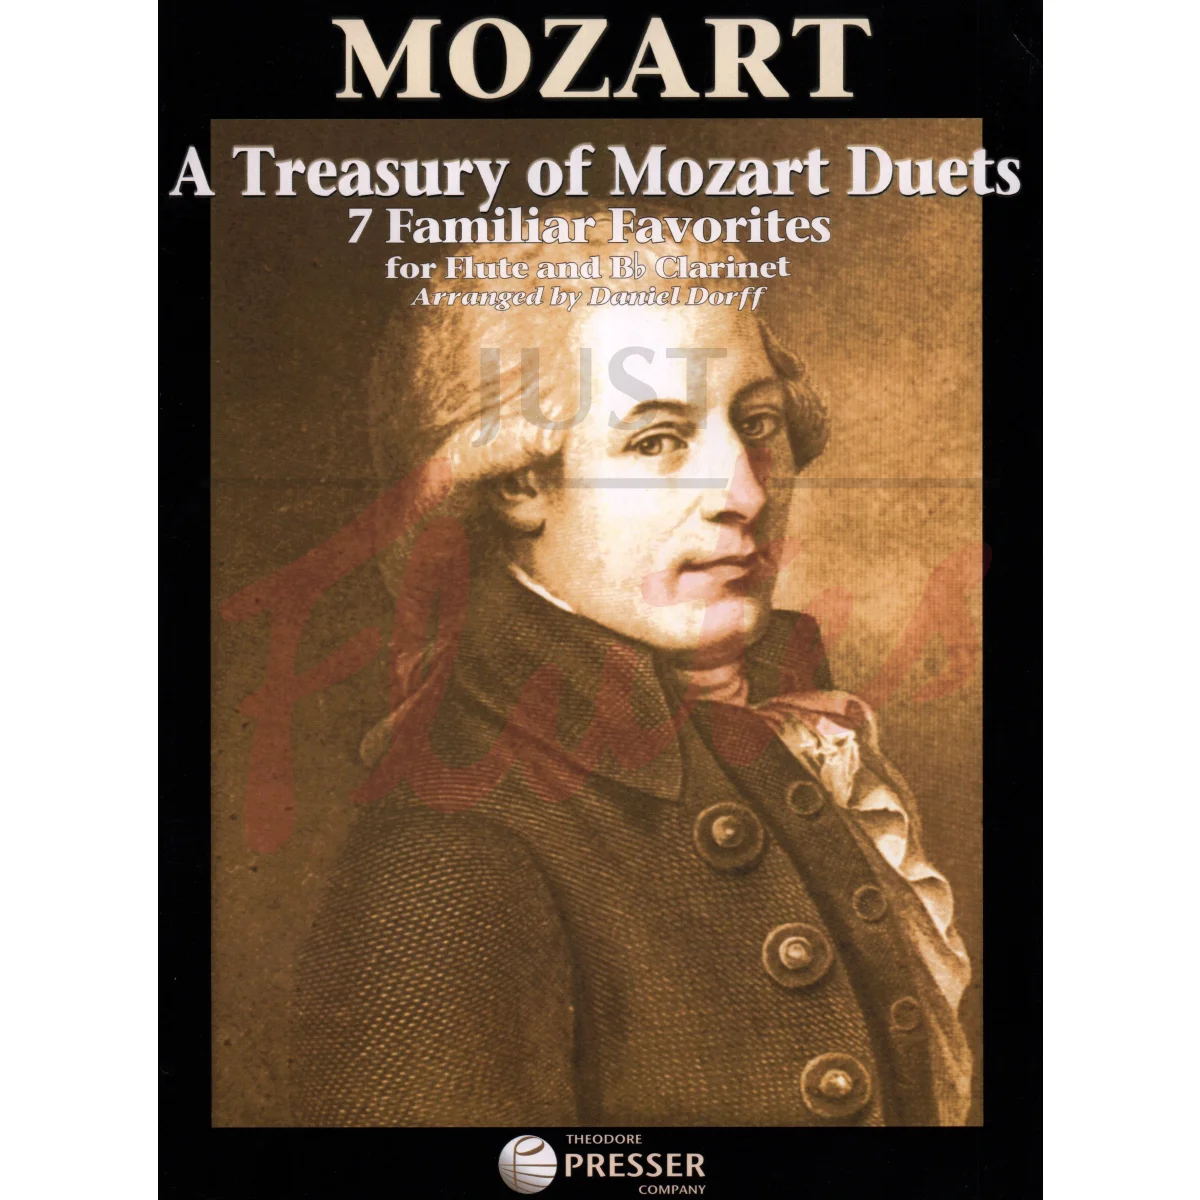 A Treasury of Mozart Duets for Flute and Clarinet